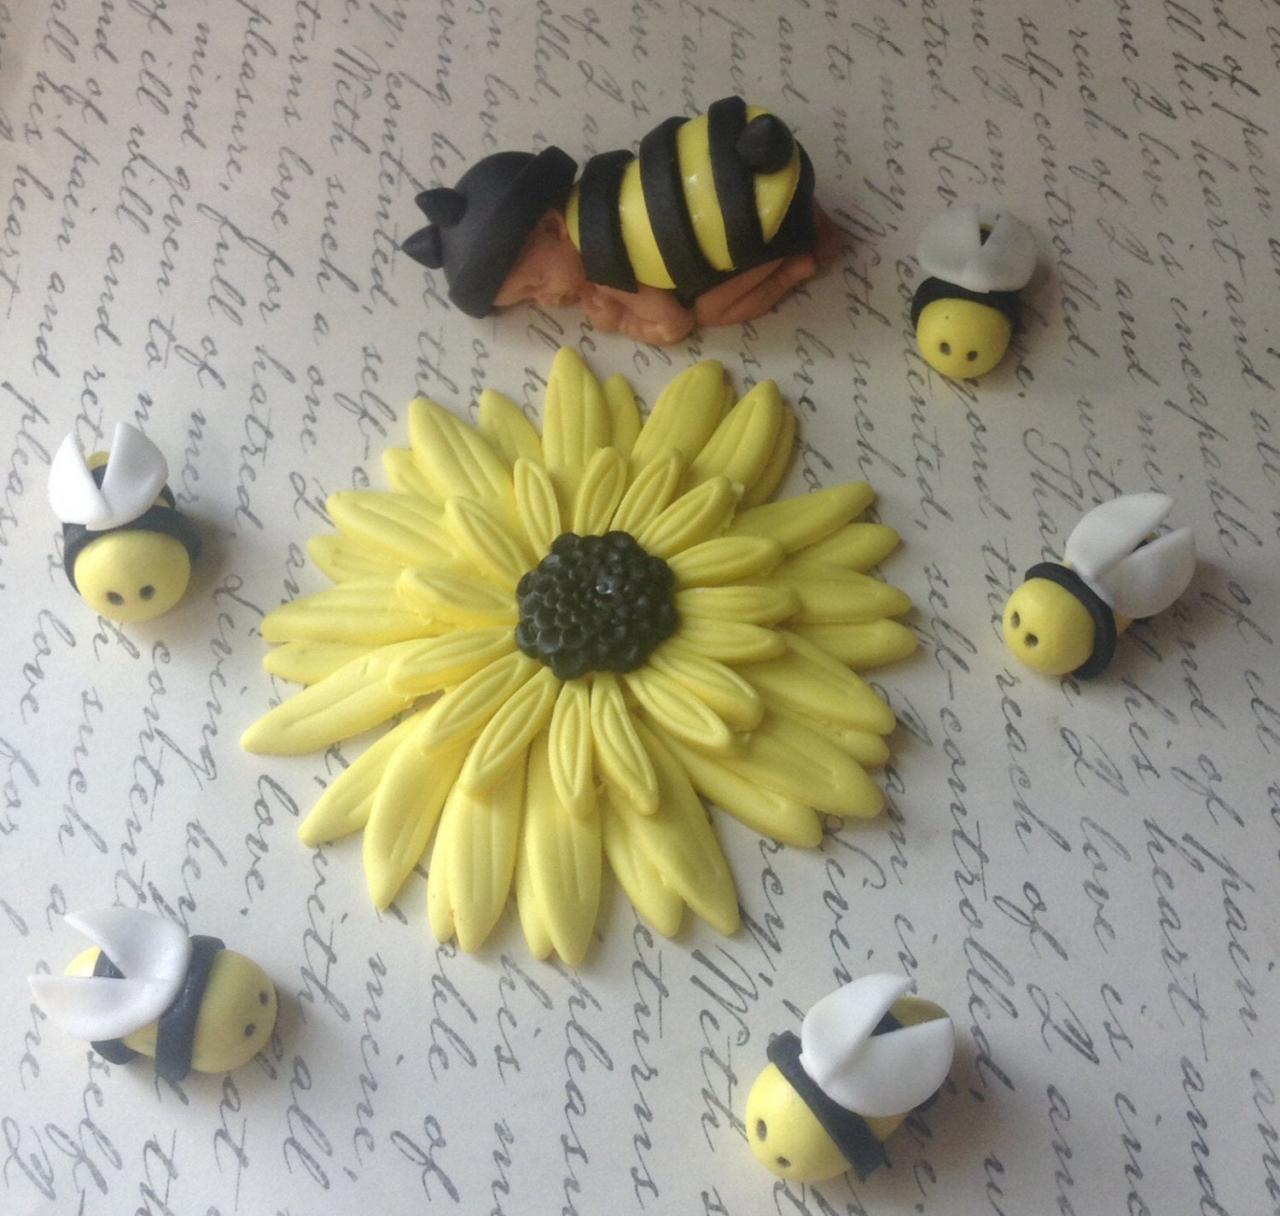 Fondant BABY BEE CAKE Topper Baby shower first Birthday Party Decorations Bumble Bee Cake